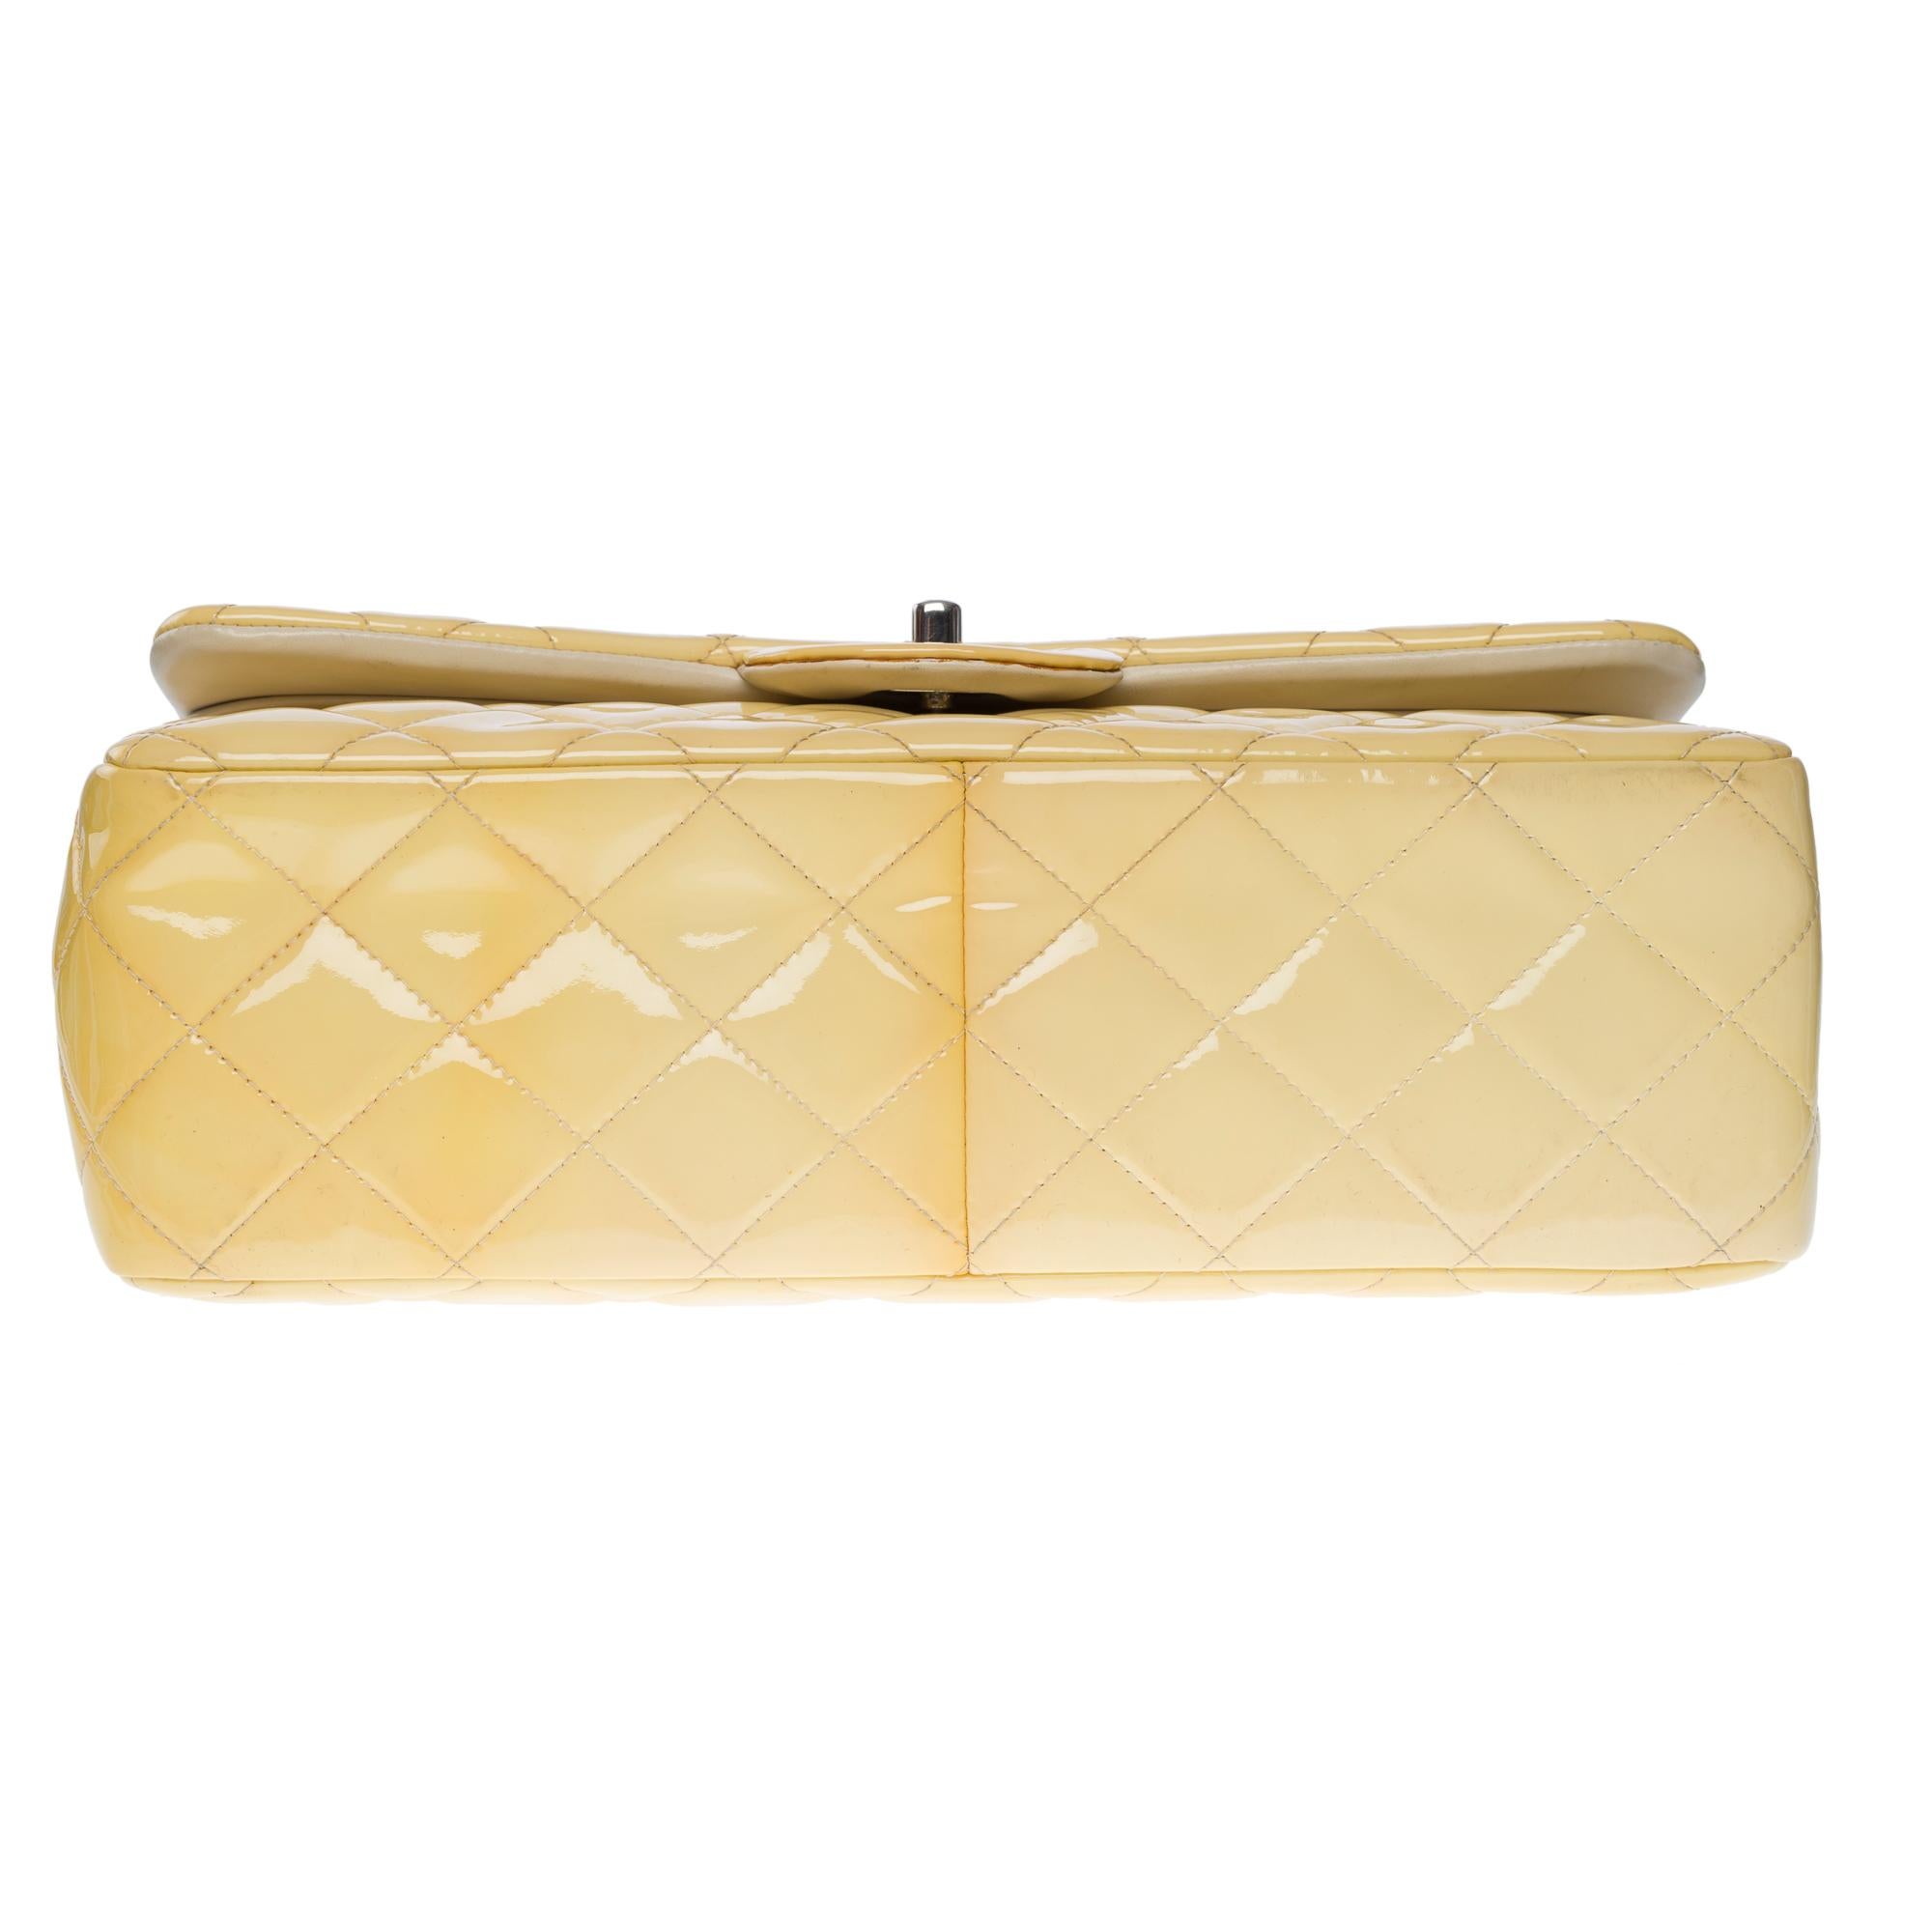 Chanel Timeless Jumbo double flap shoulder bag in yellow patent leather, SHW 5